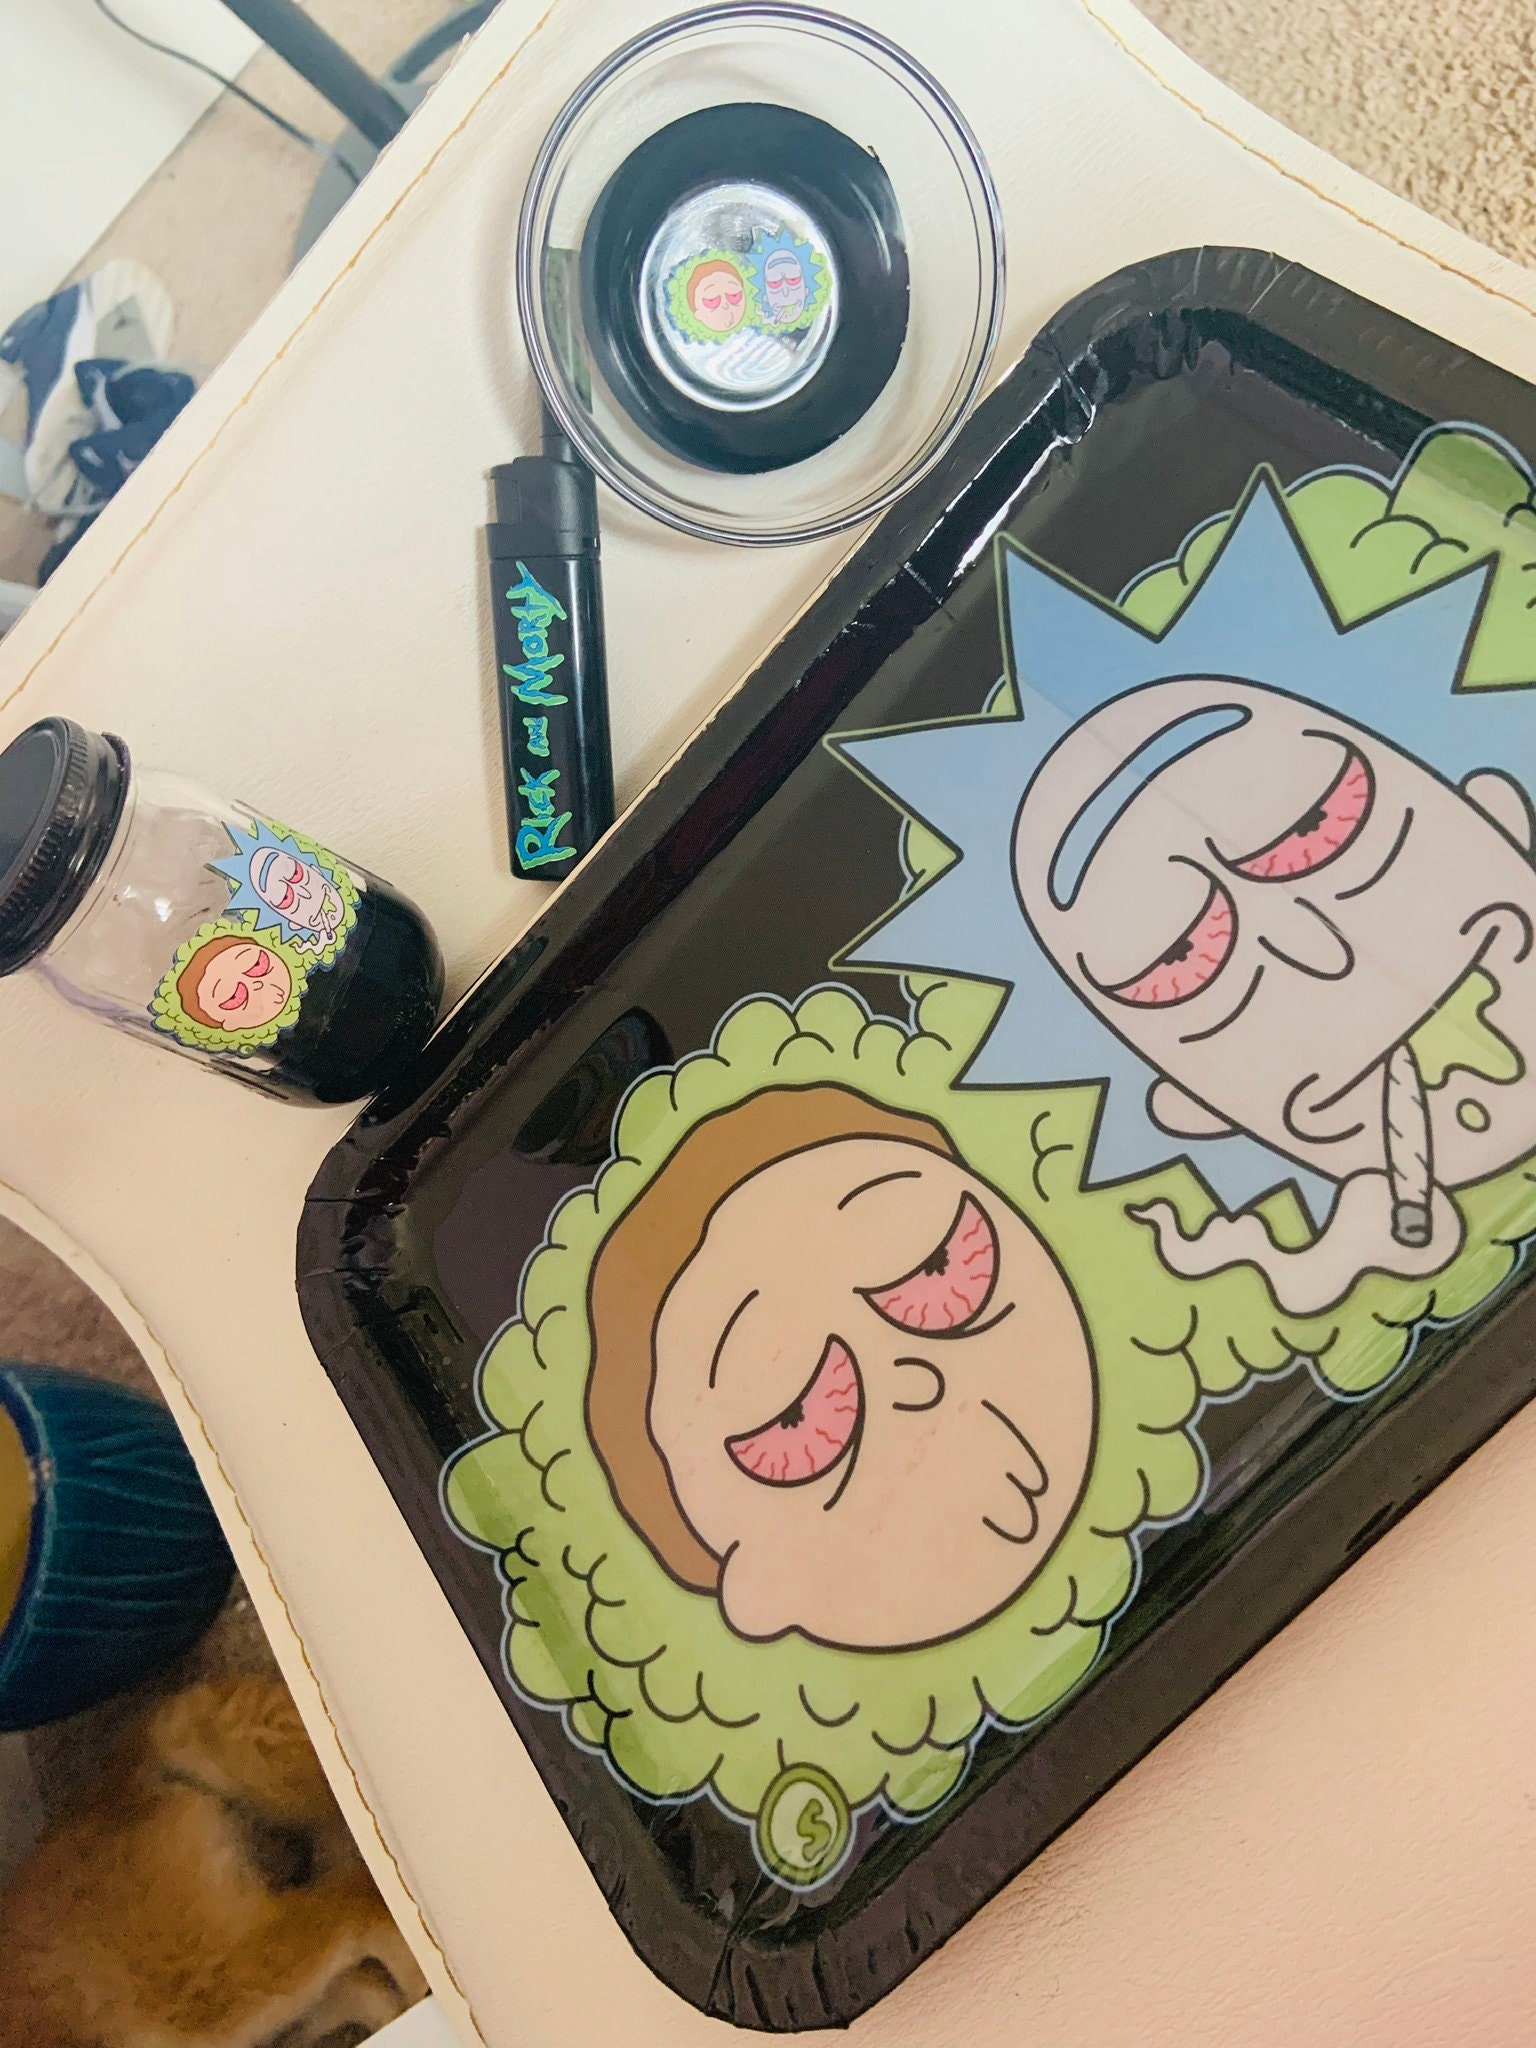 The Head Shop - Rick and Morty Metal rolling tray w/ matching holographic  tray cover! #rollingtray #theheadshop413 #rickandmortyart